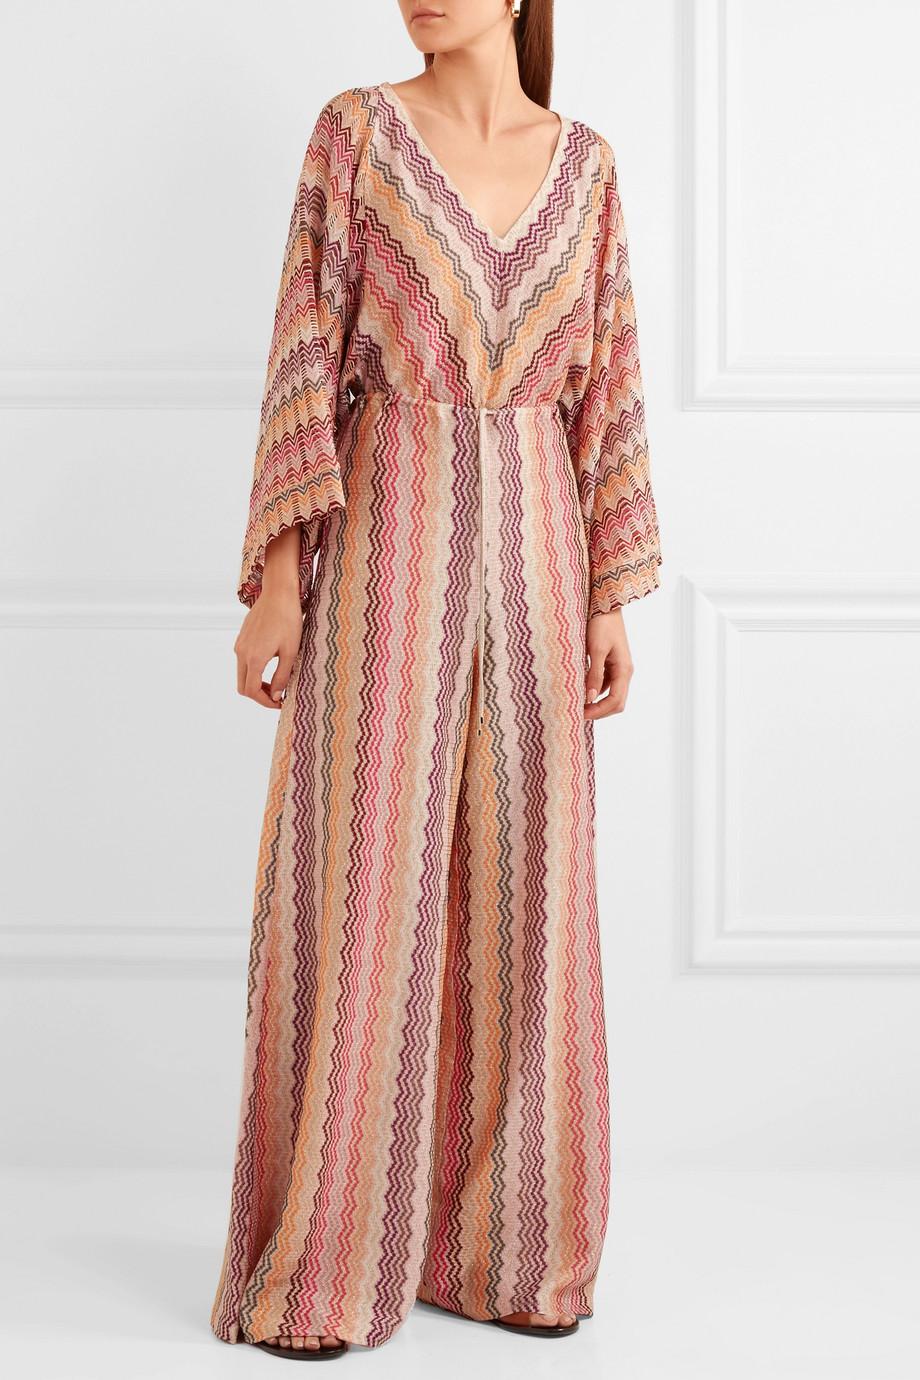 Go for all-out Ibizan glamour in Missoni's multicolored woven zigzag jumpsuit. Stacked heels and gold jewelry will complete the look. 

A sexy and elegant Missoni signature piece that will last you for many summers - Timeless classic!

Missoni